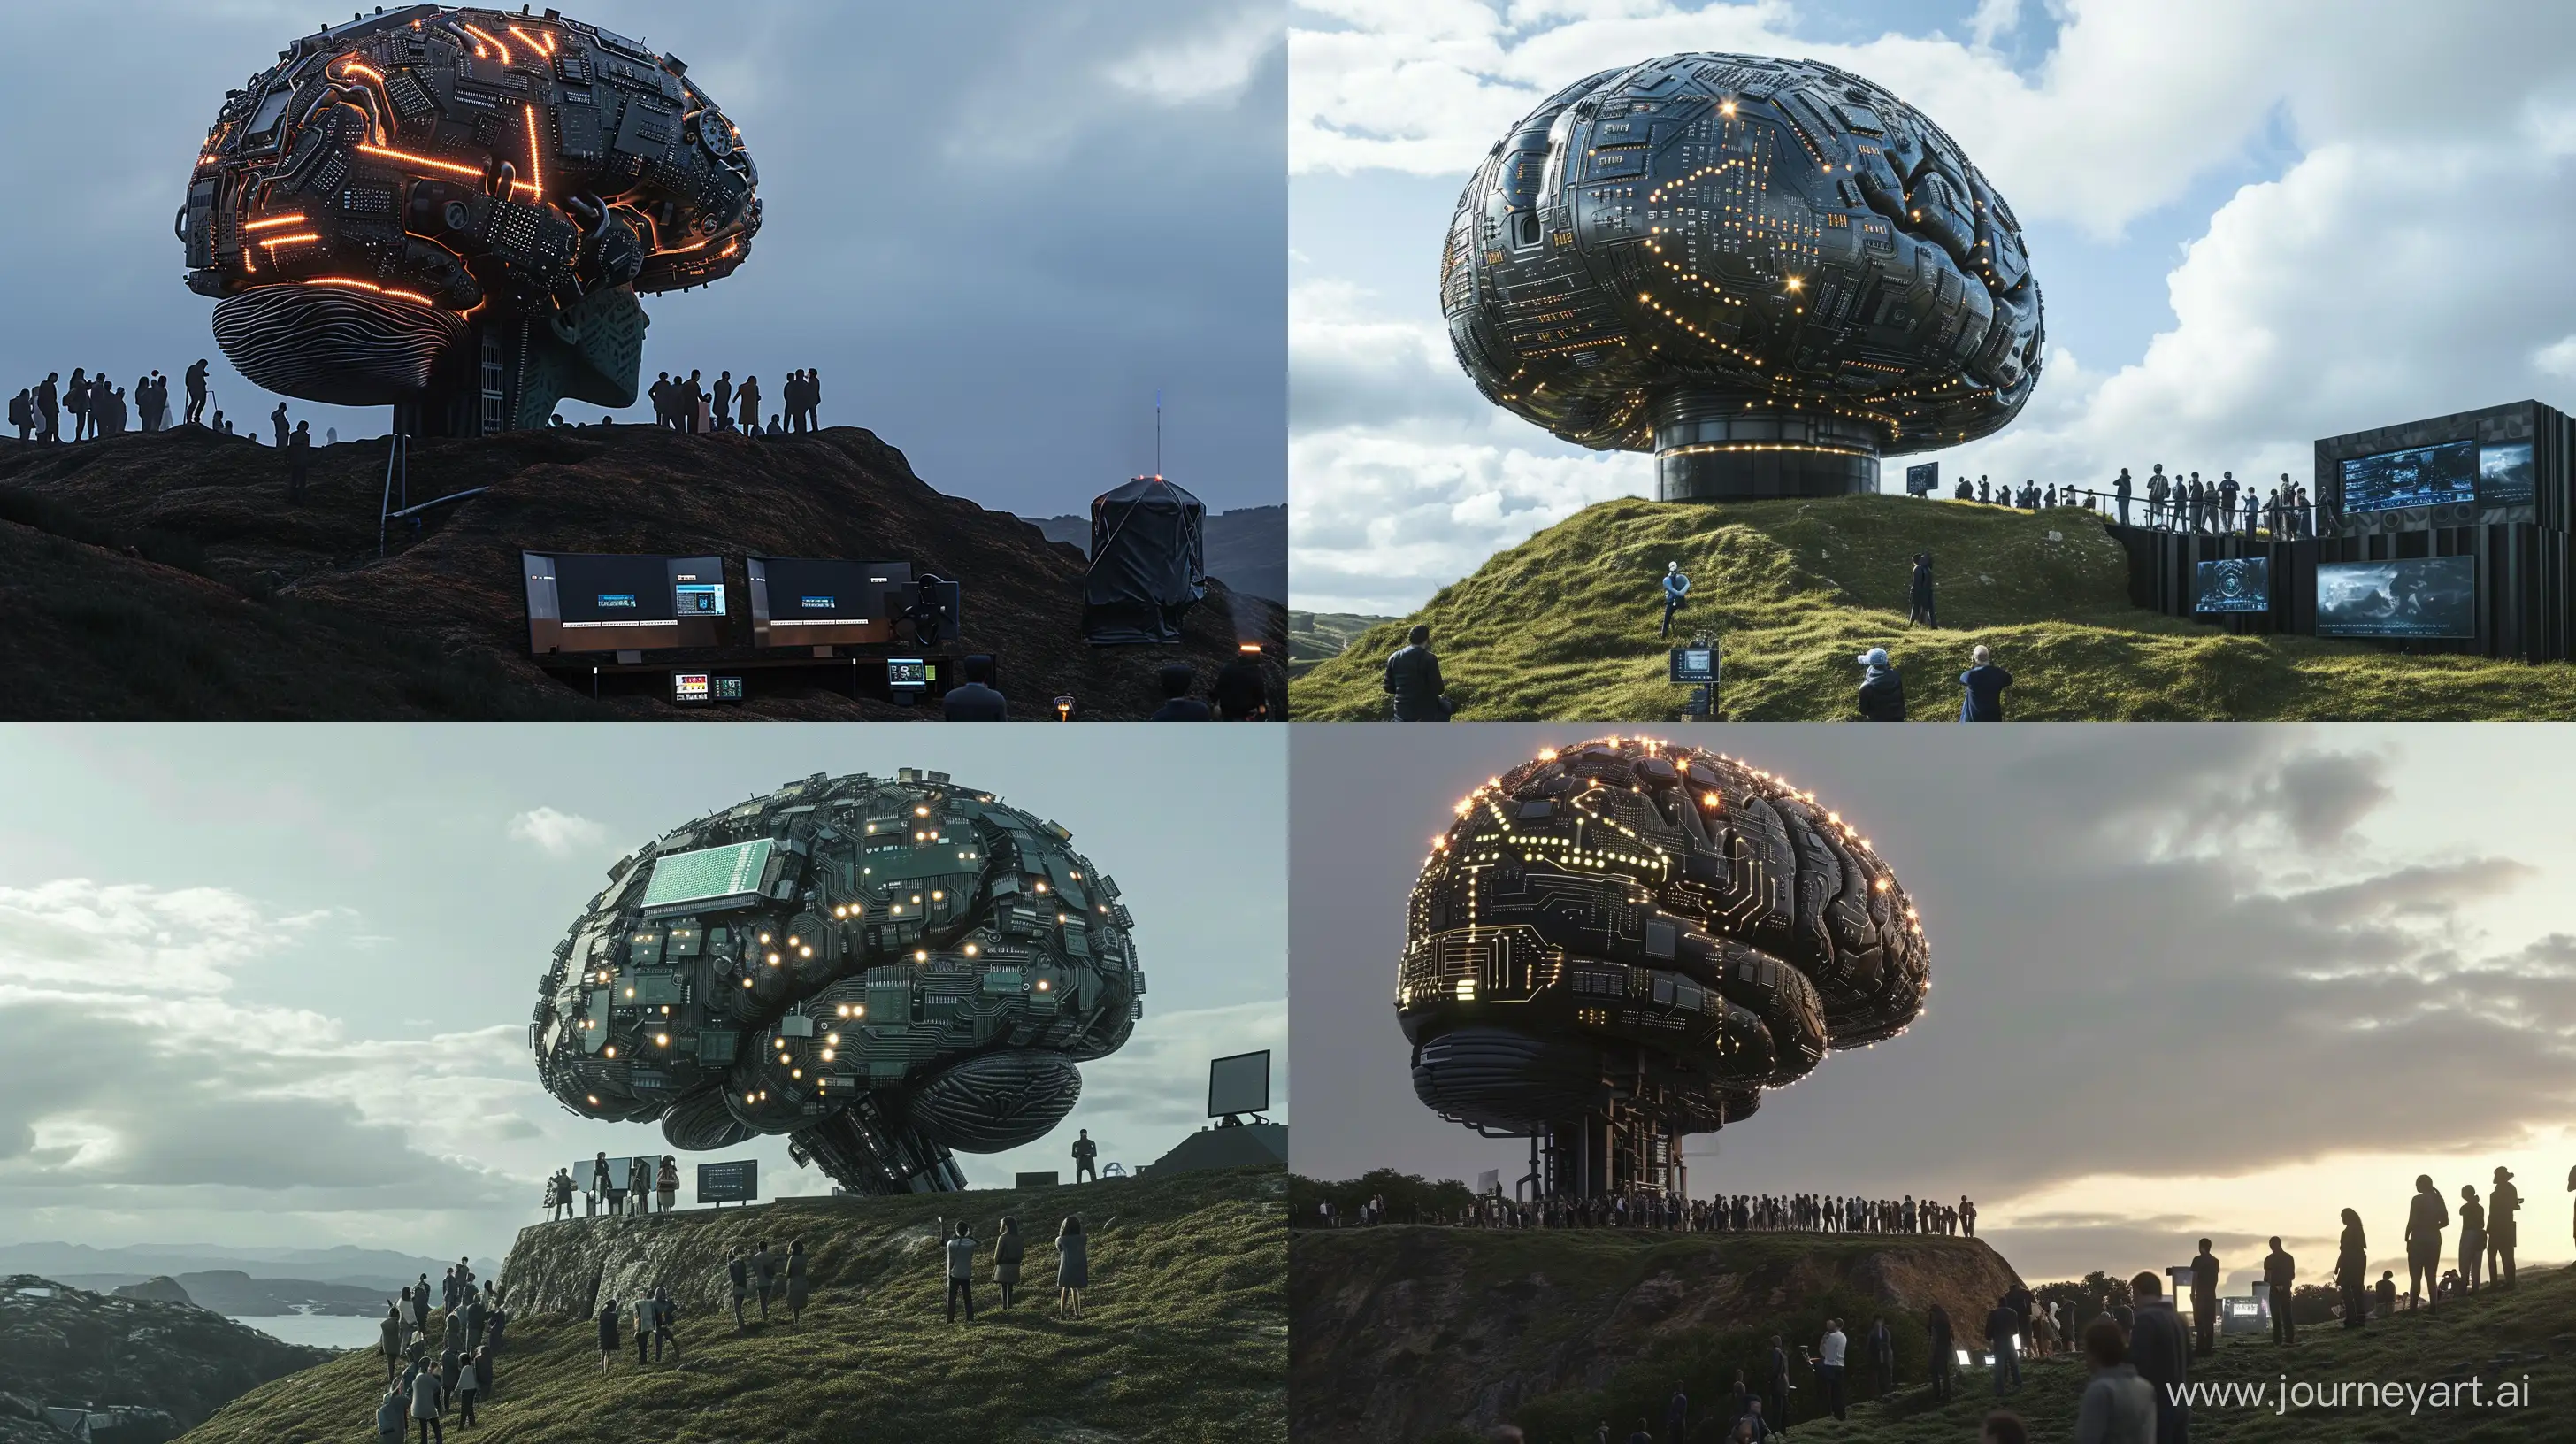 Futuristic-AI-Gathering-Giant-Electronic-Brain-Attracts-Crowds-on-Hilltop